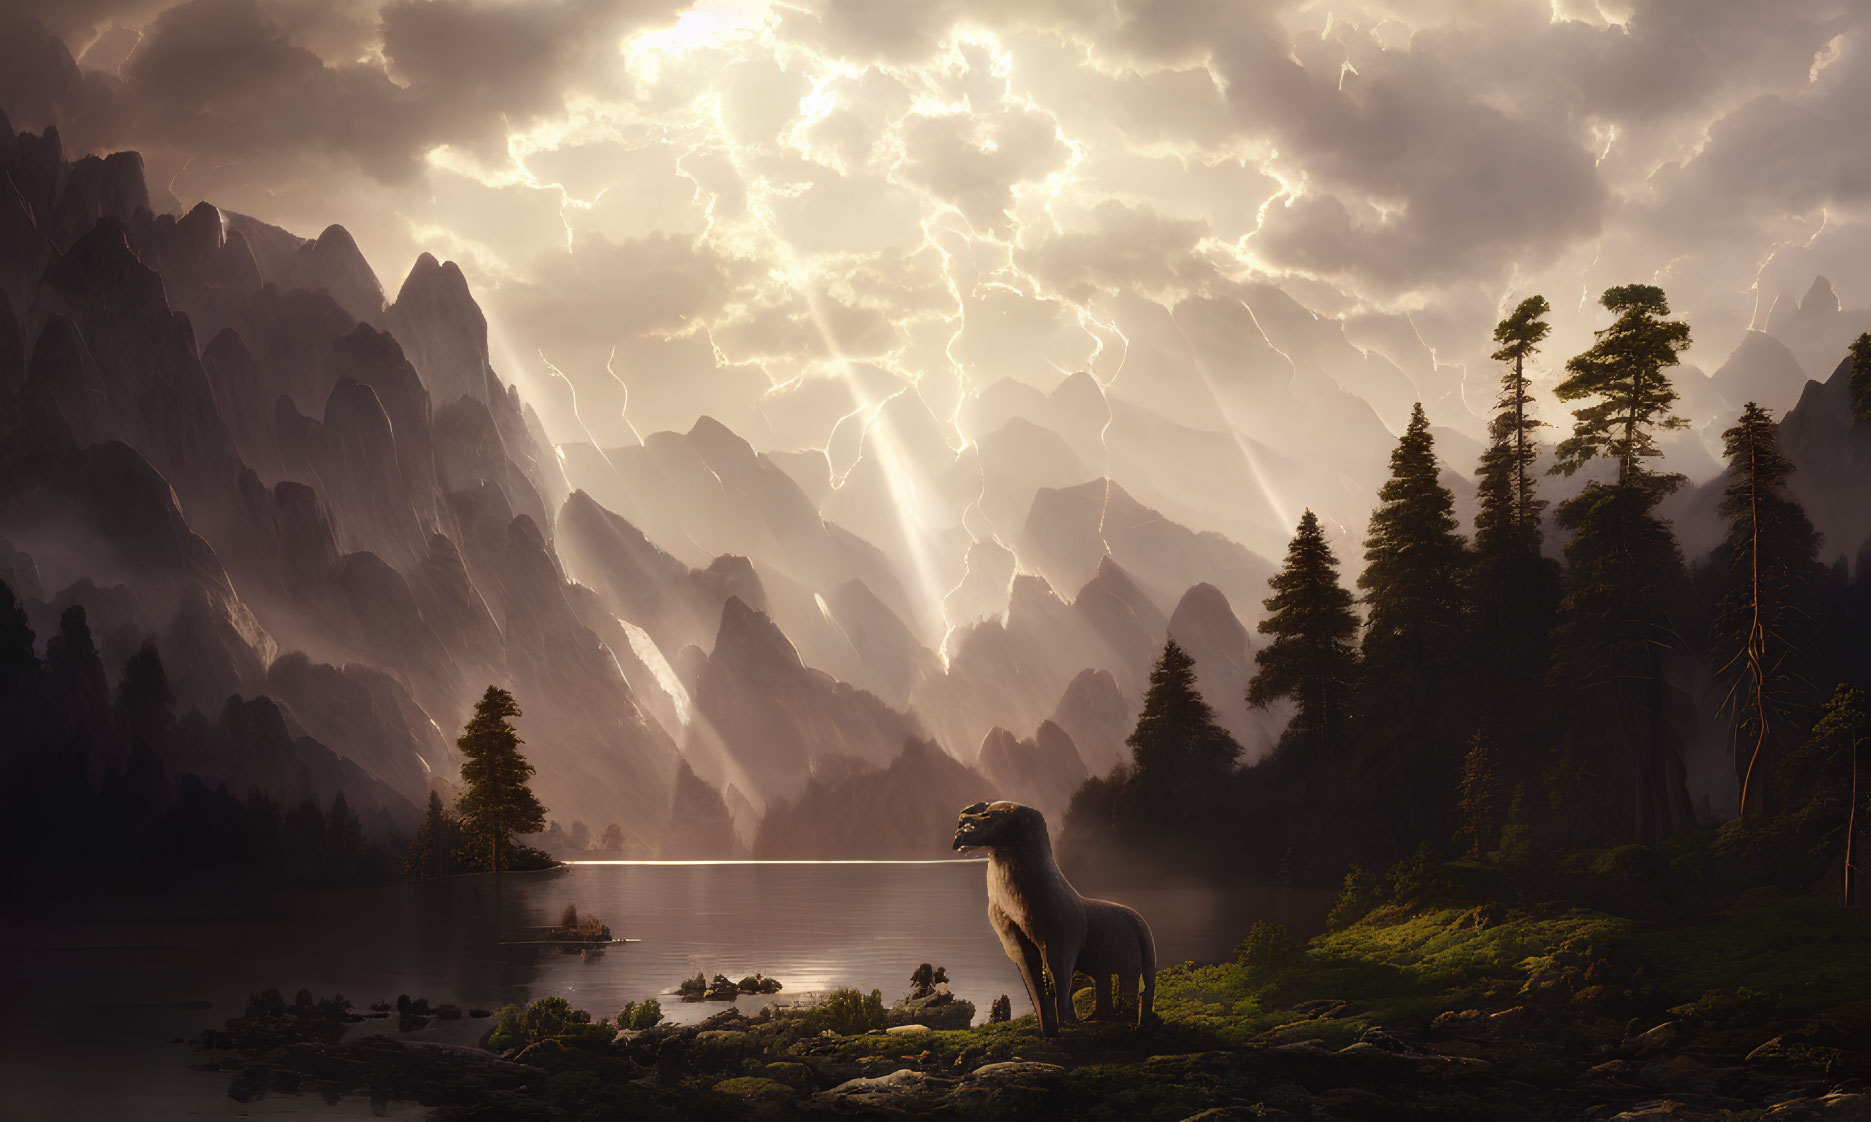 Serene lake, steep mountains, stormy sky, lightning bolts, lone creature, lush forest landscape